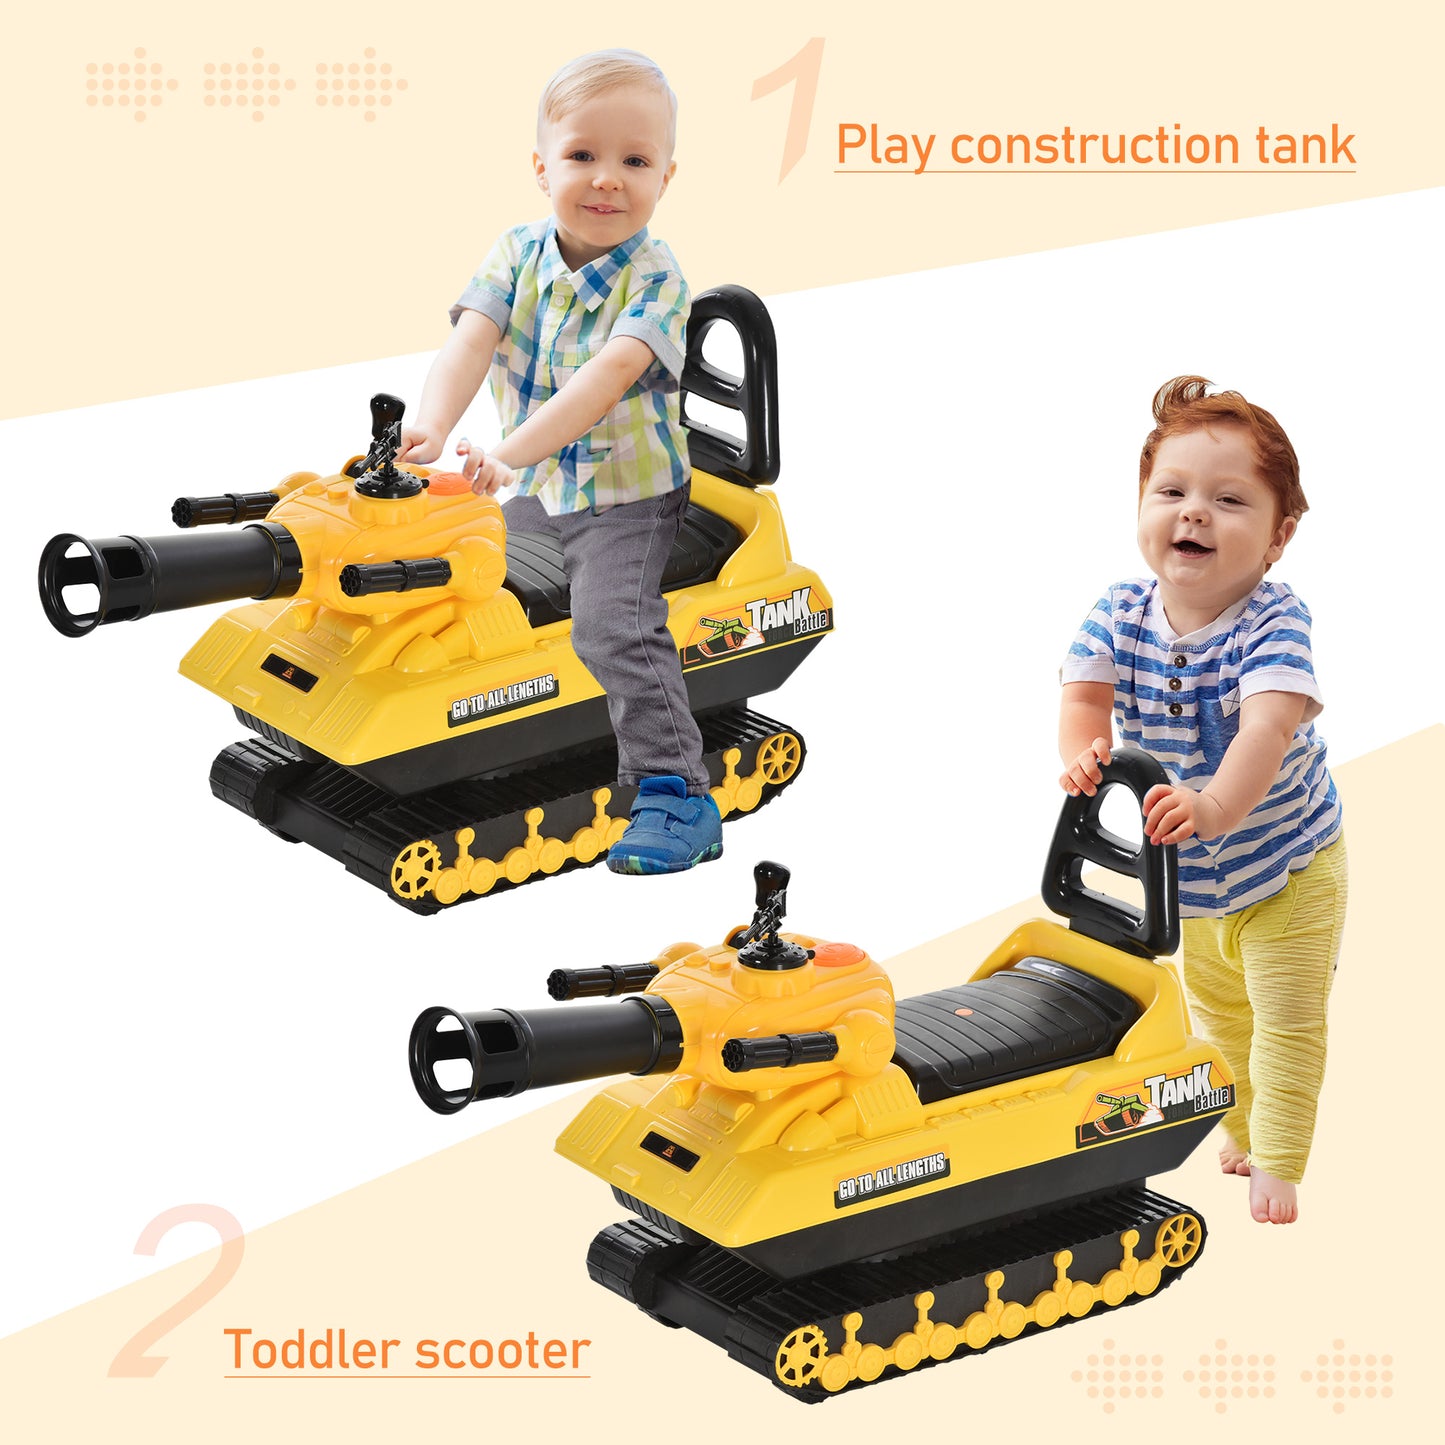 HOMCOM 4 in 1 Horn Ride-on Bullet Tank Play Construction Truck Storage Scooter